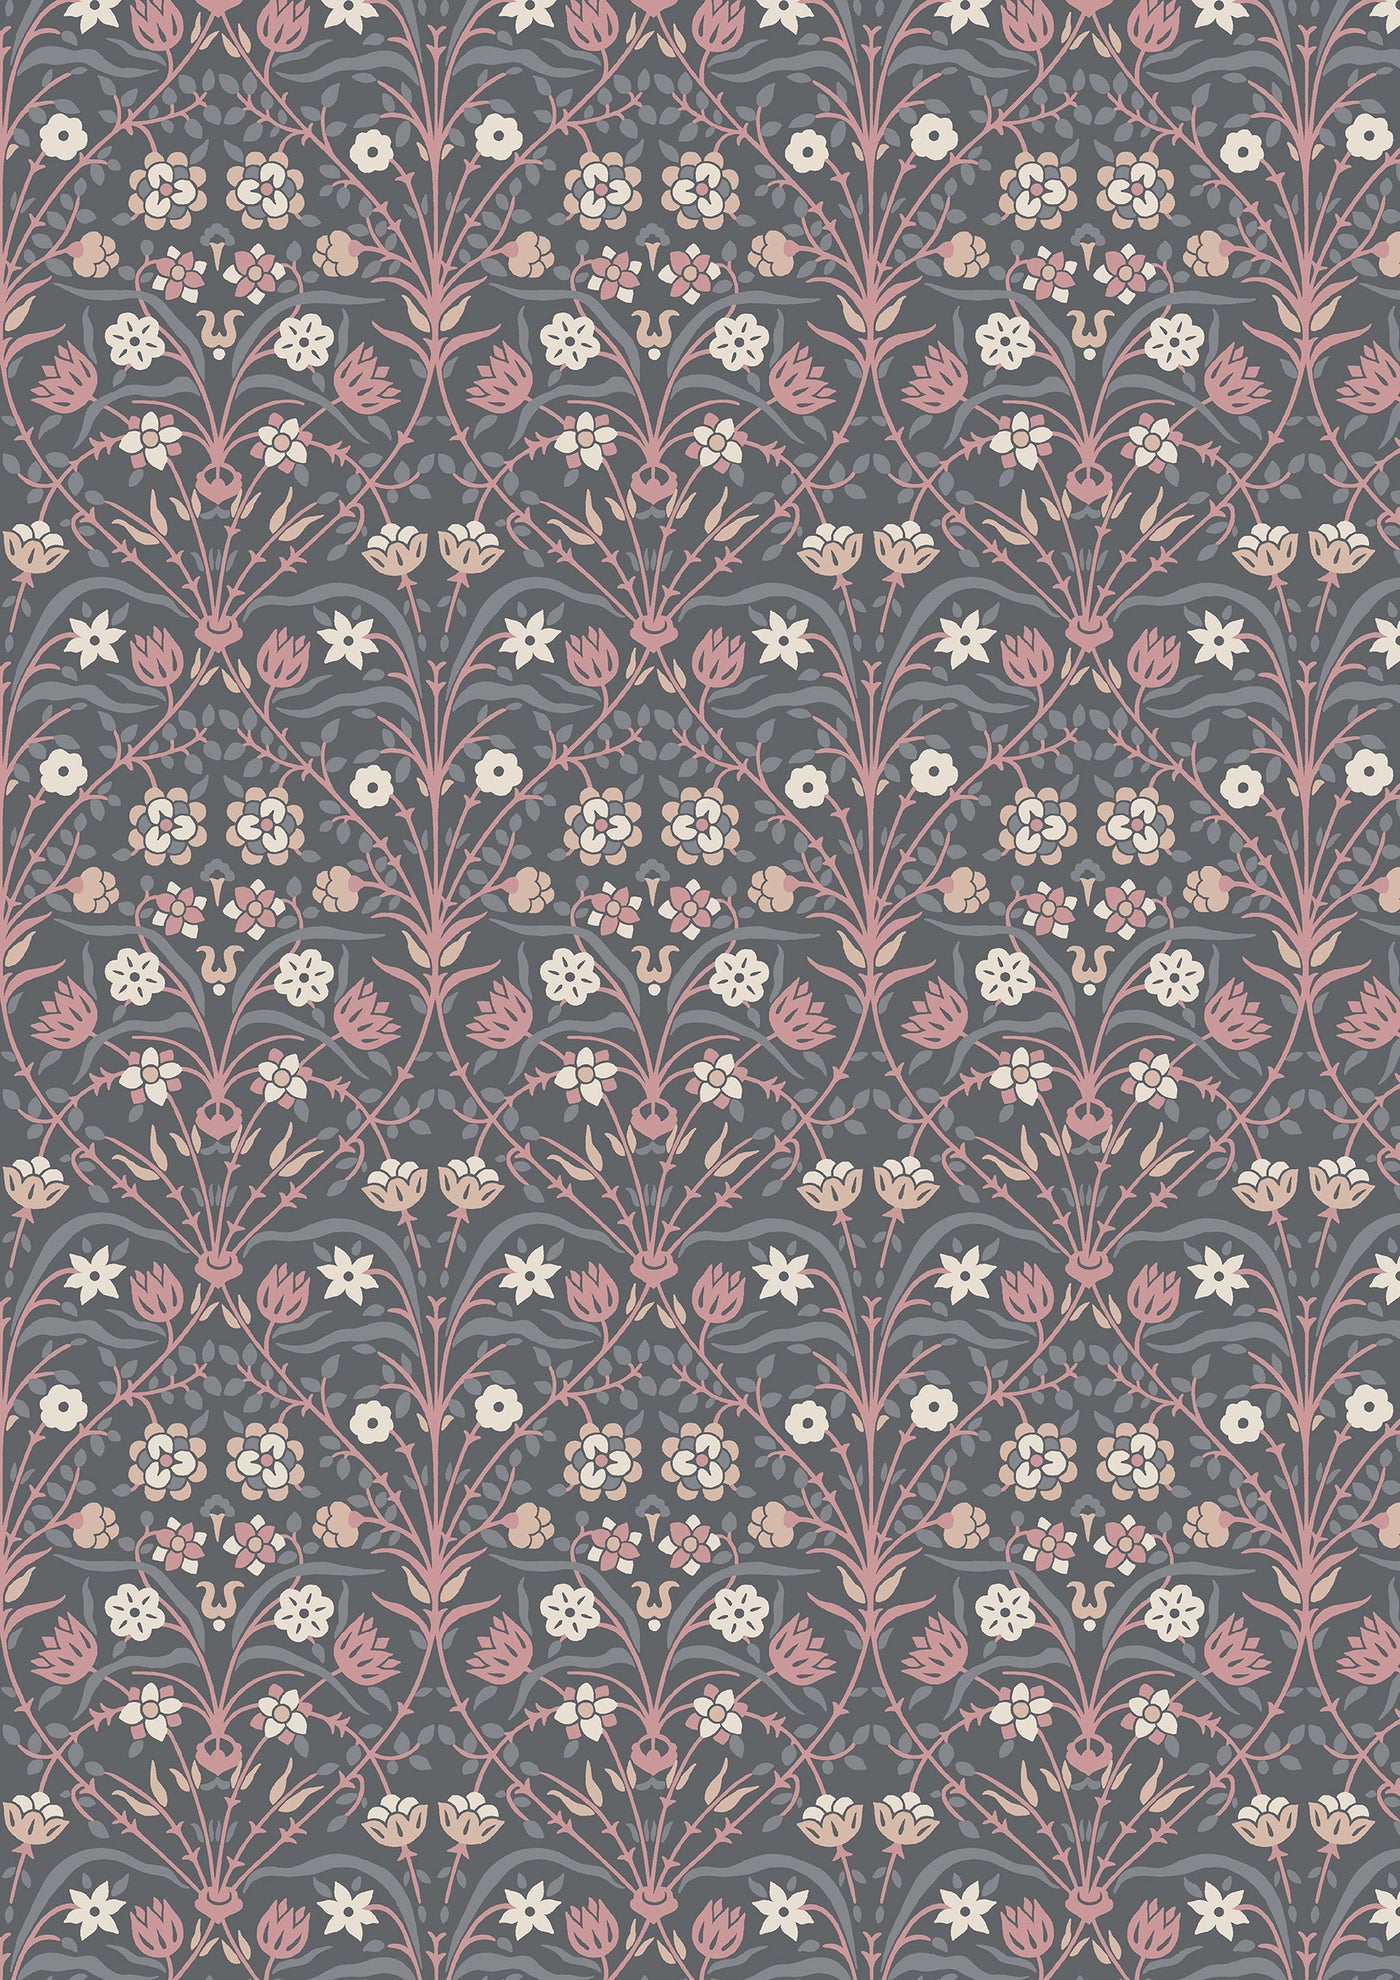 Bankart Fresco from the winterbourne collection by Liberty of London fabrics